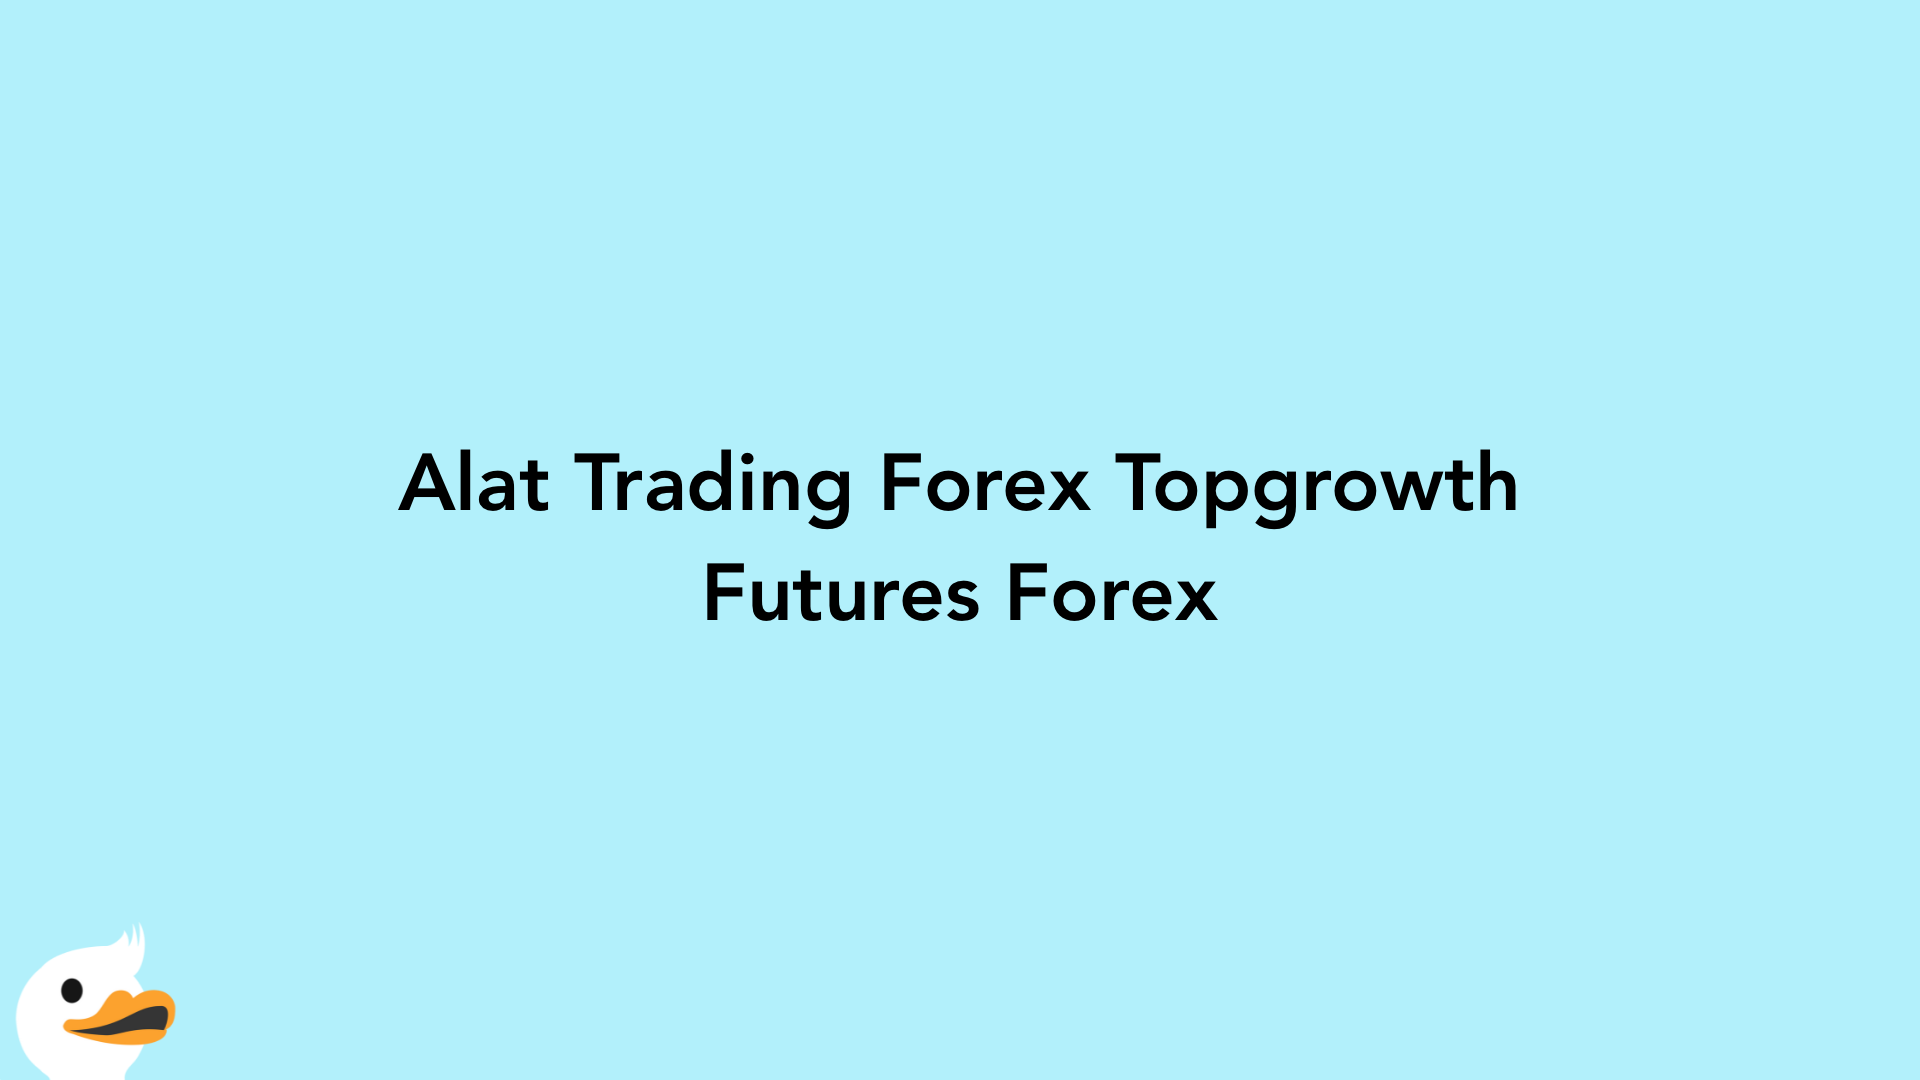 Alat Trading Forex Topgrowth Futures Forex